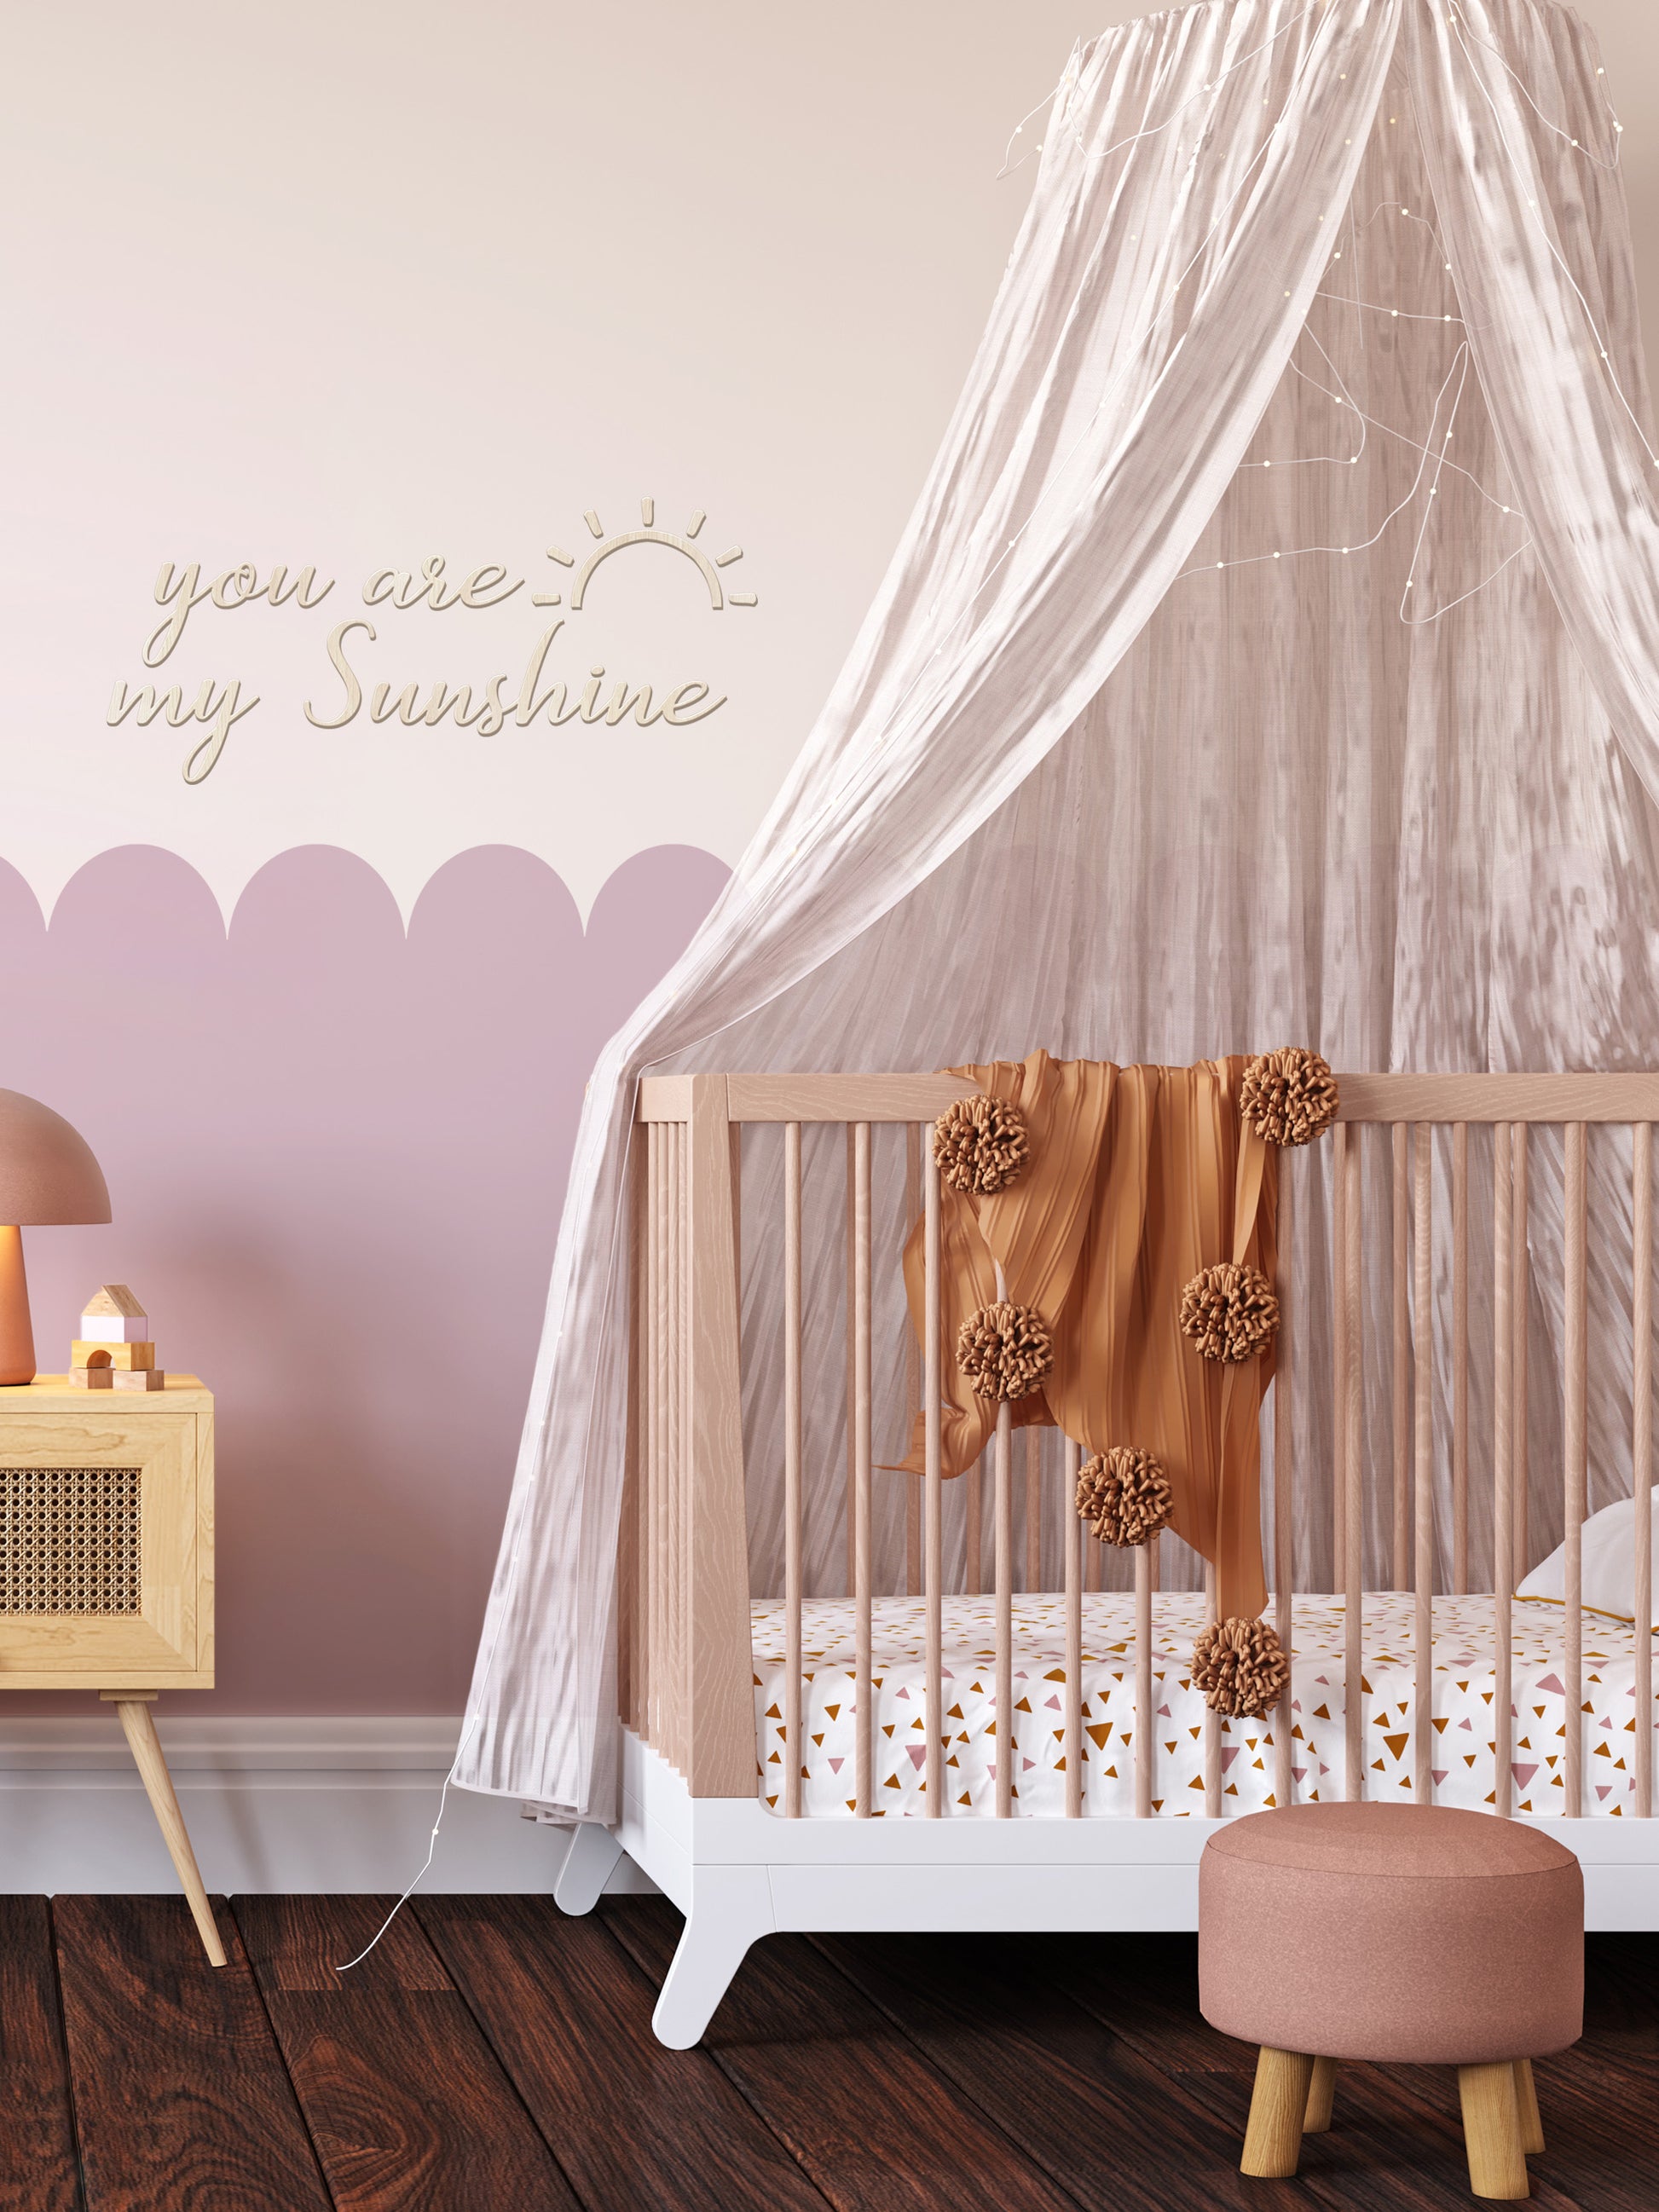 You are my sunshine - Wall Decals - Fable and Fawn 